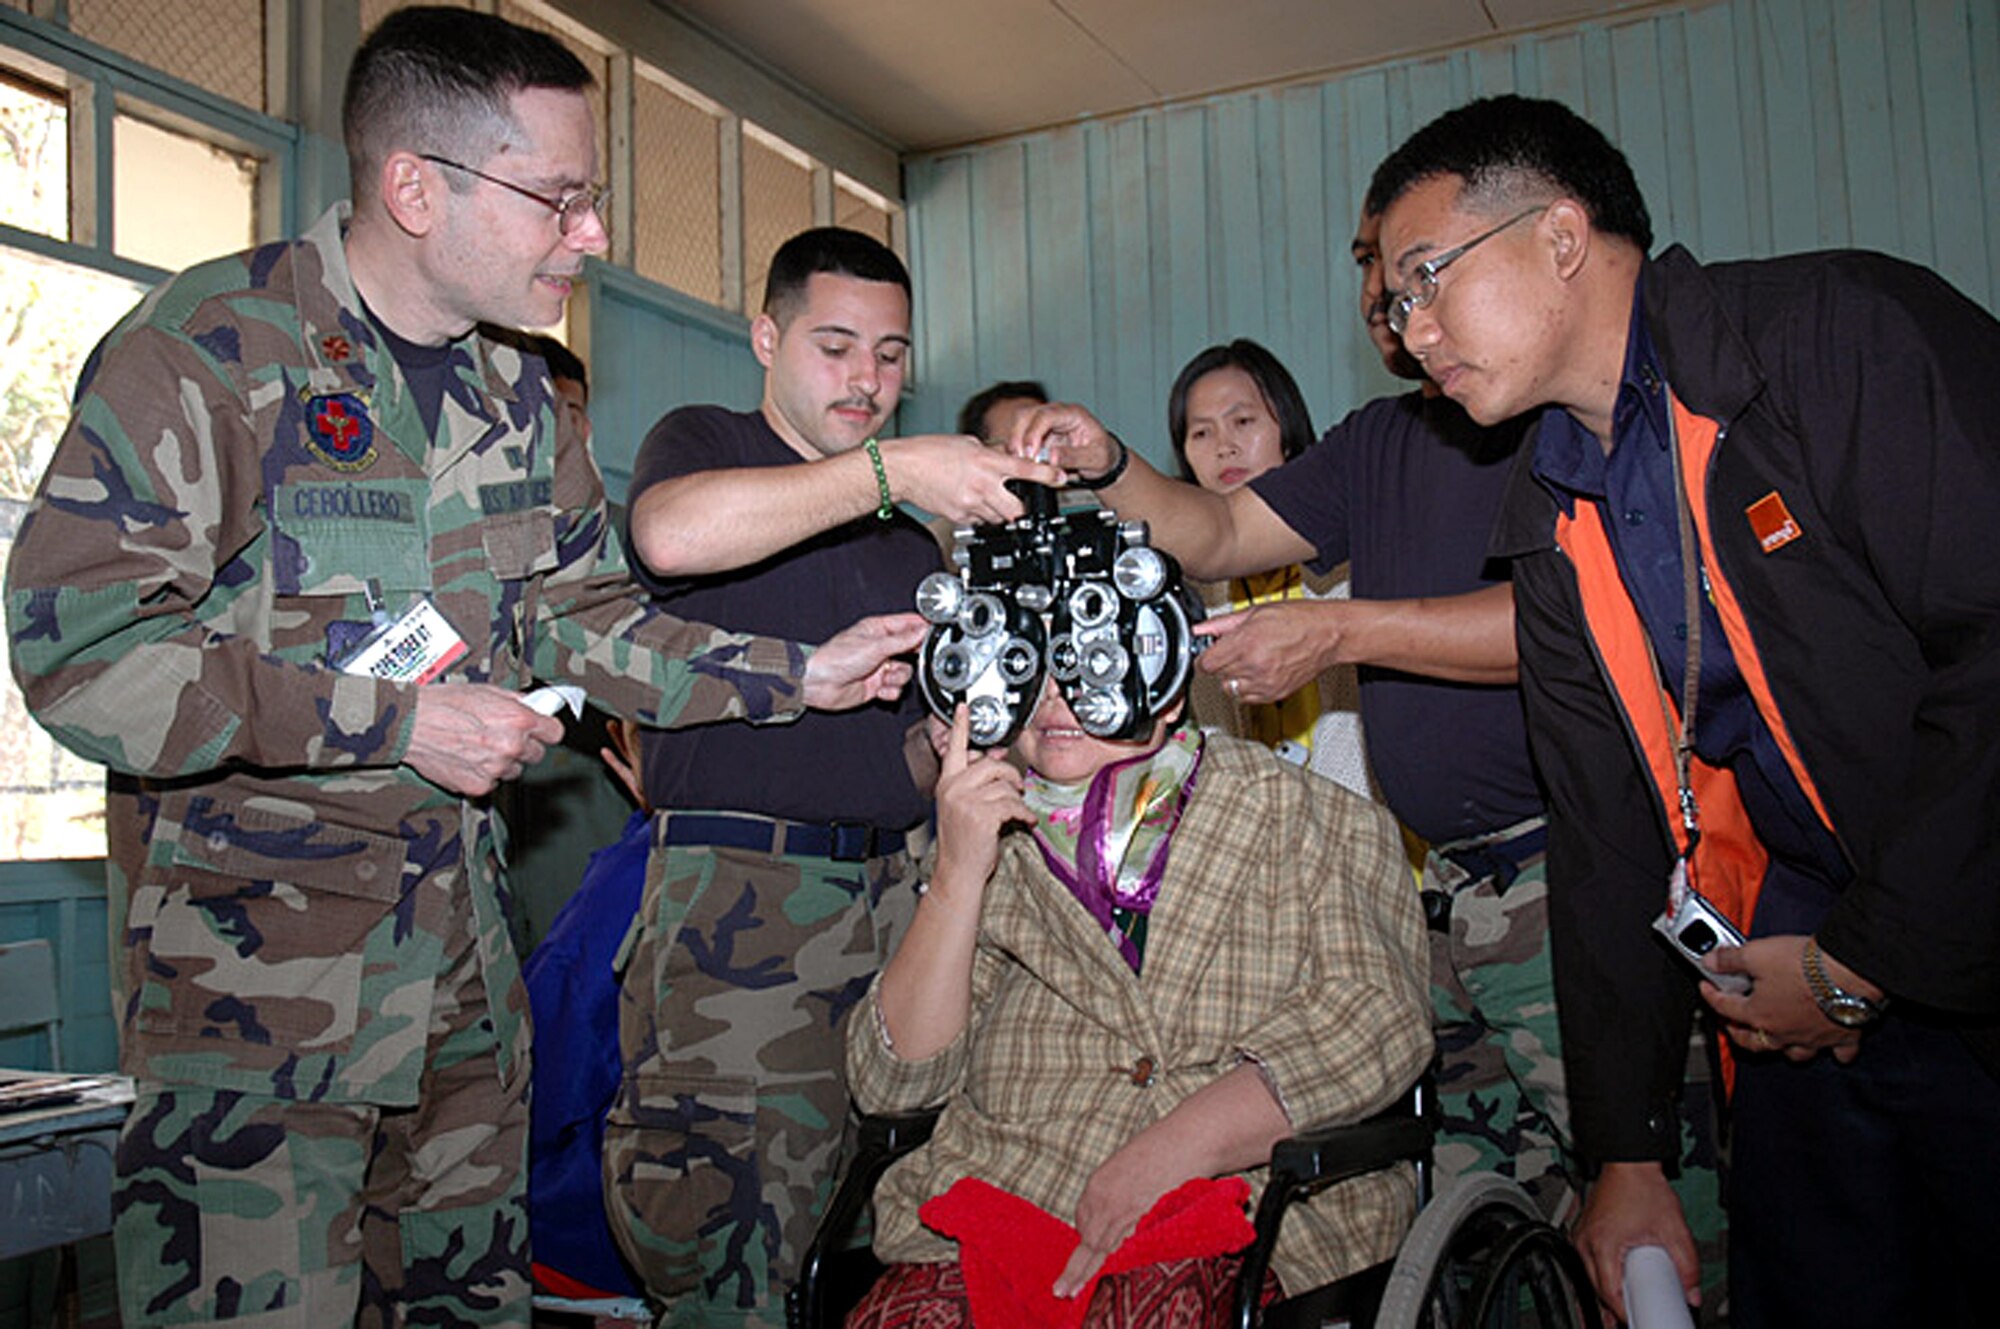 Maj. Carlos Cebollero adjusts the settings for the sharpest vision during an examination of a wheelchair-bound patient as Senior Airman David Hernandez and Tech. Sgt. Edward Hill hold the vision testing equipment in place as an interpreter listens closely Jan. 30 in Korat, Thailand. Airman Hernandez and Major Cebollero are assigned to the 374th Aeromedical Dental Squadron at Yokota Air Base, Japan, and Sergeant Hill is from the 18th Aeromedical Dental Squadron at Kadena AB, Japan. Military members from the United States, Thailand and Republic of Singapore took part in a humanitarian mission at the school as part of Exercise Cope Tiger 2007. (U.S. Air Force photo/Staff Sgt. Betty Squatrito-Martin) 
